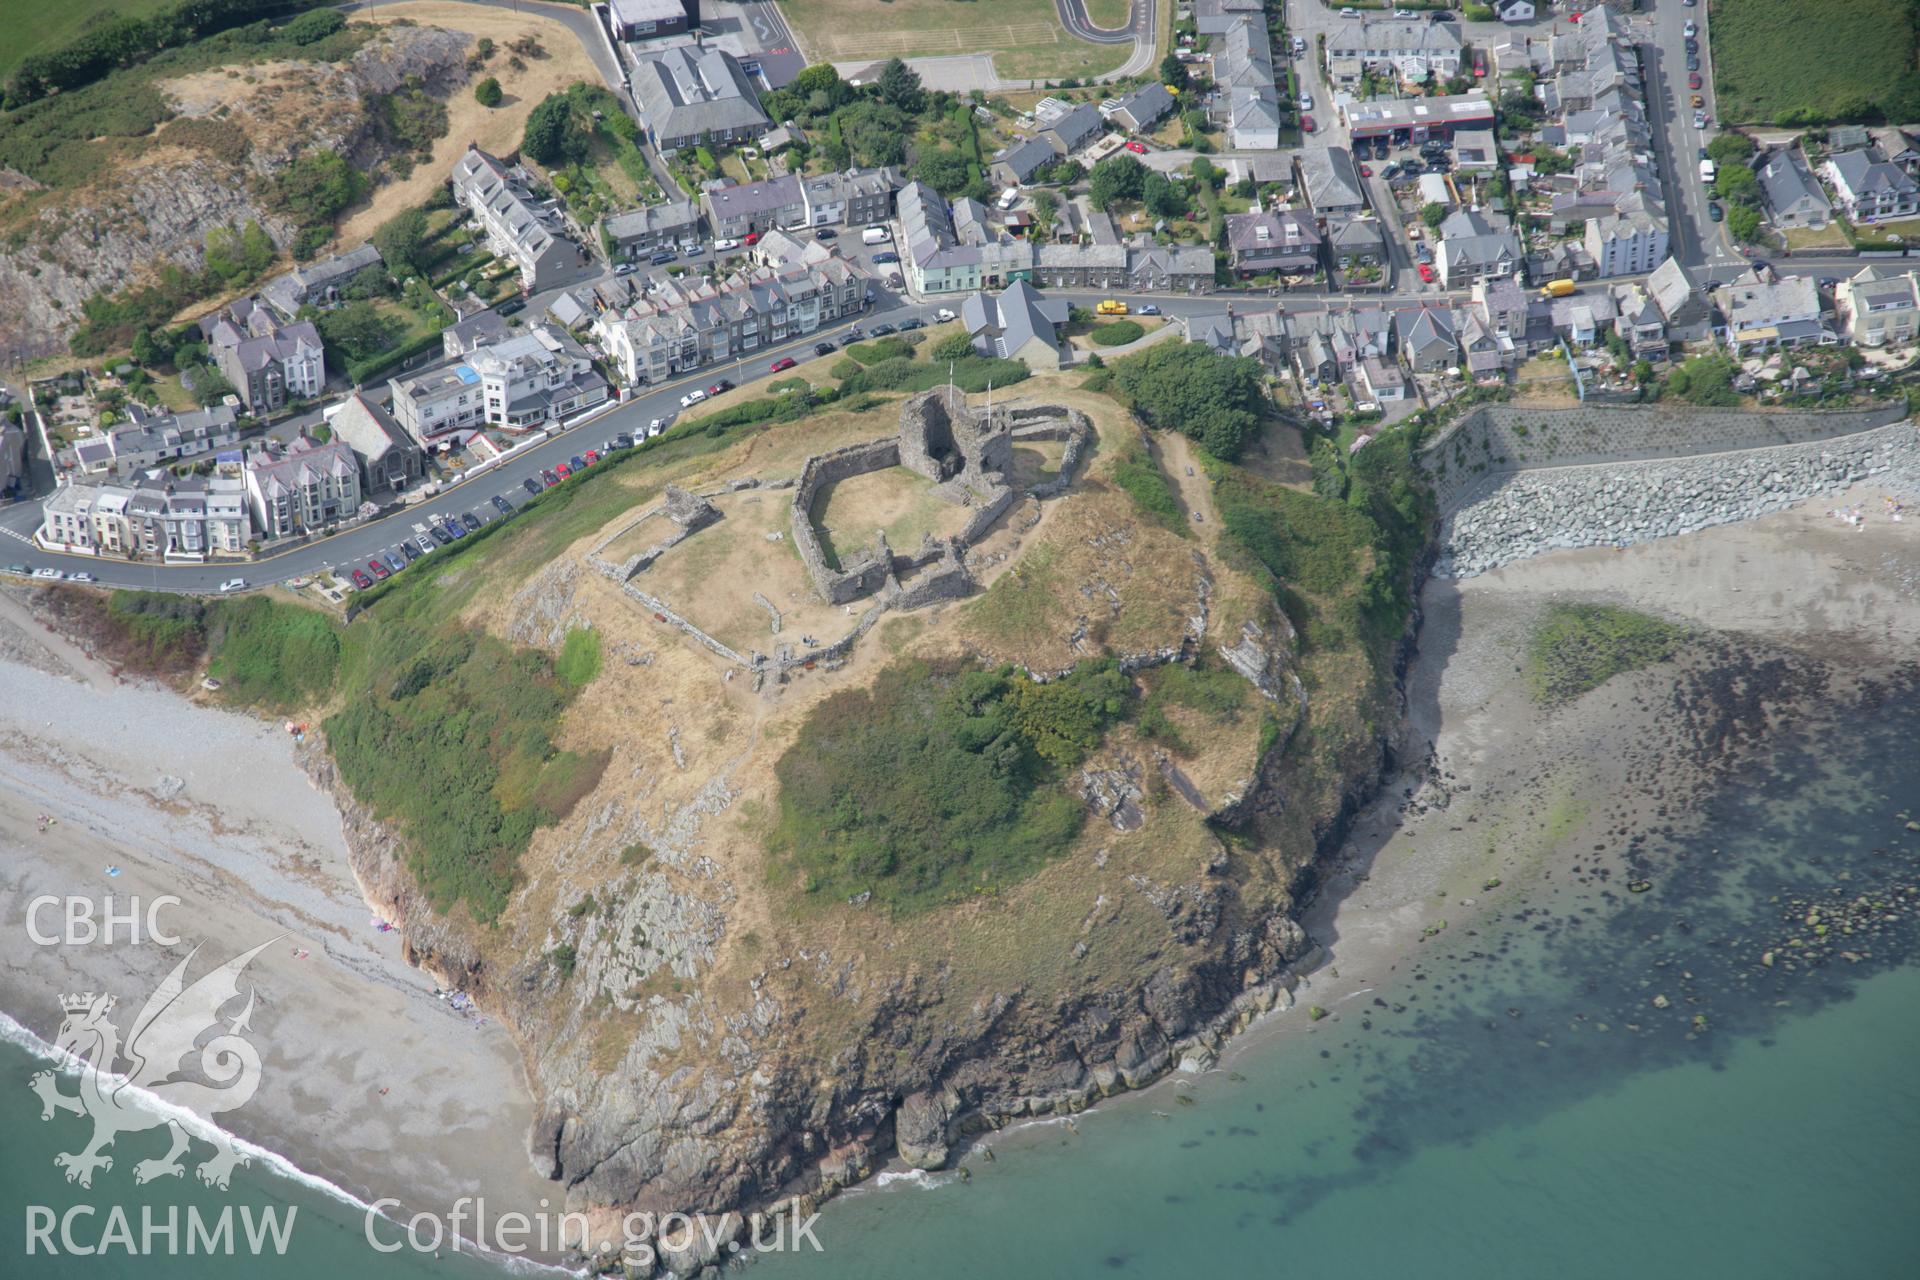 RCAHMW colour oblique aerial photograph of Criccieth Castle. Taken on 25 July 2006 by Toby Driver.